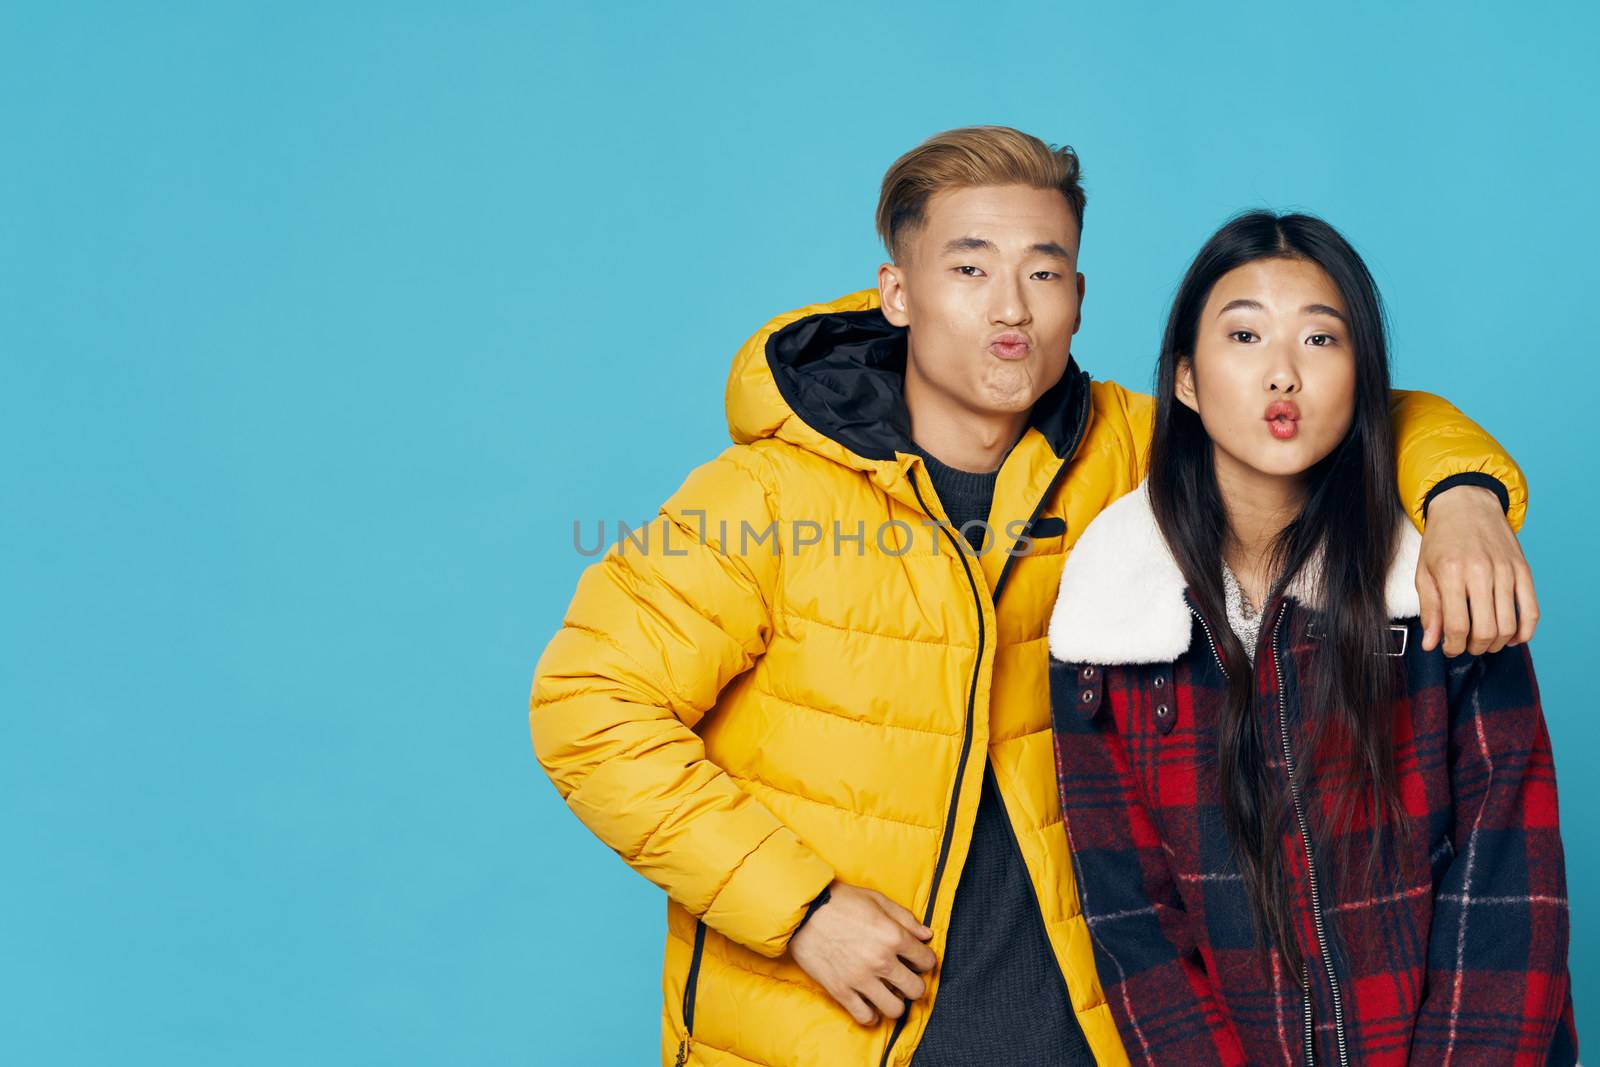 Man in a yellow jacket Asian appearance and woman air kiss by SHOTPRIME